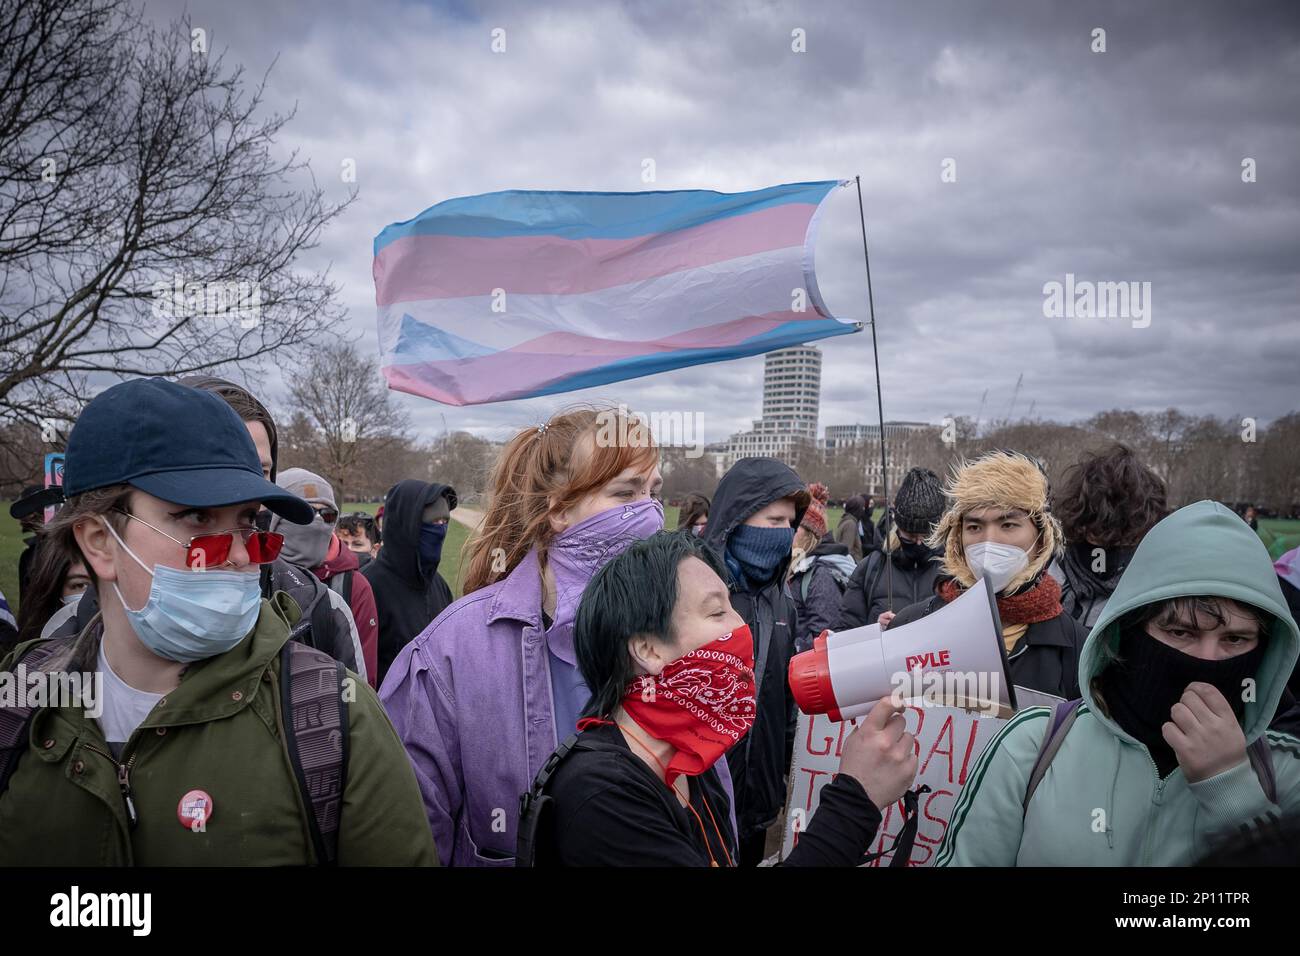 Transgender rights activists counter-protest and clash with Standing For Women feminists near the Reformers' Tree in Hyde Park, London, UK. Stock Photo